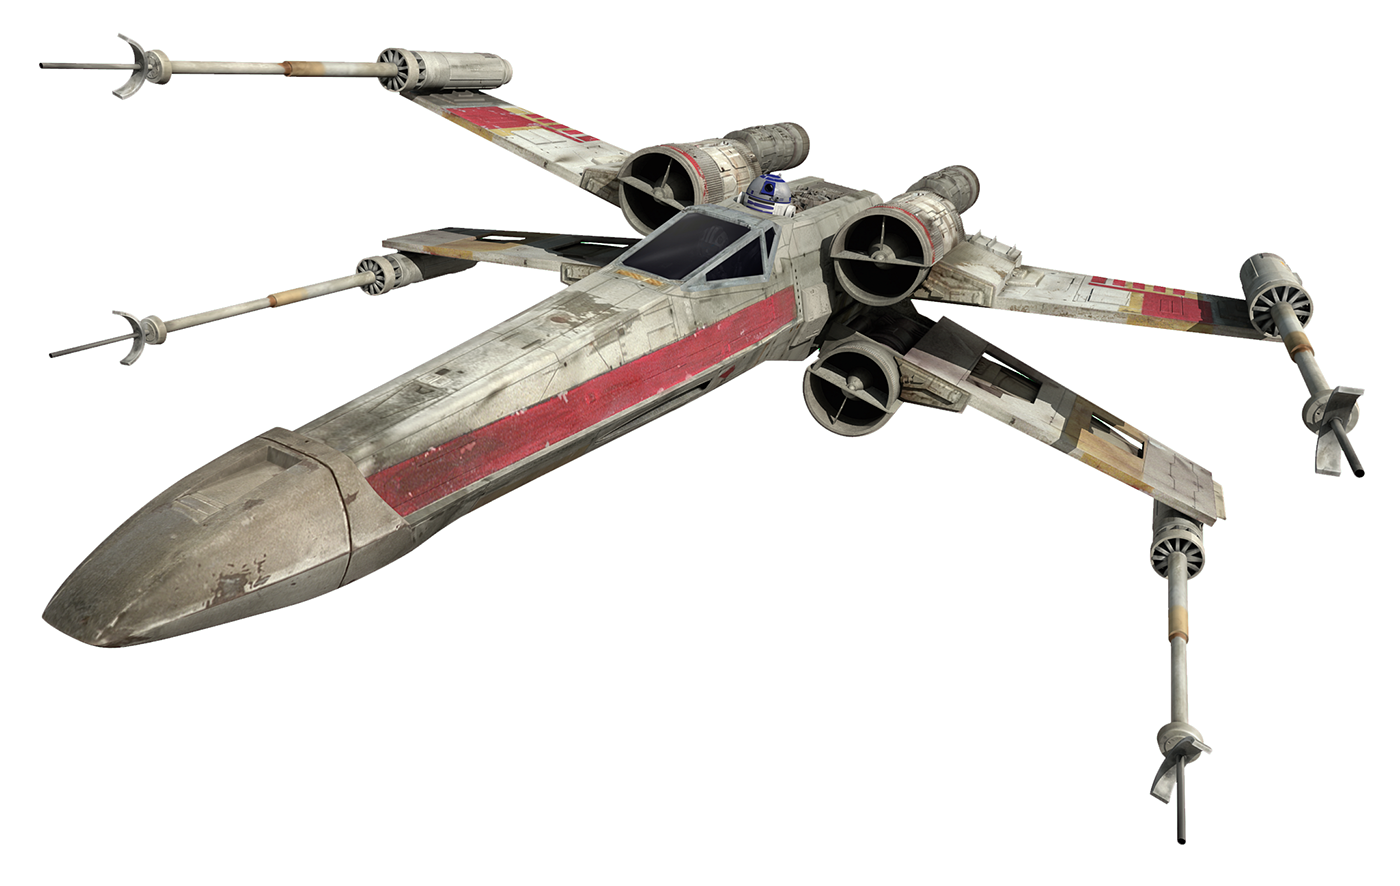 X-Wing Starfighters were a type of starfighter marked by their distinctive....